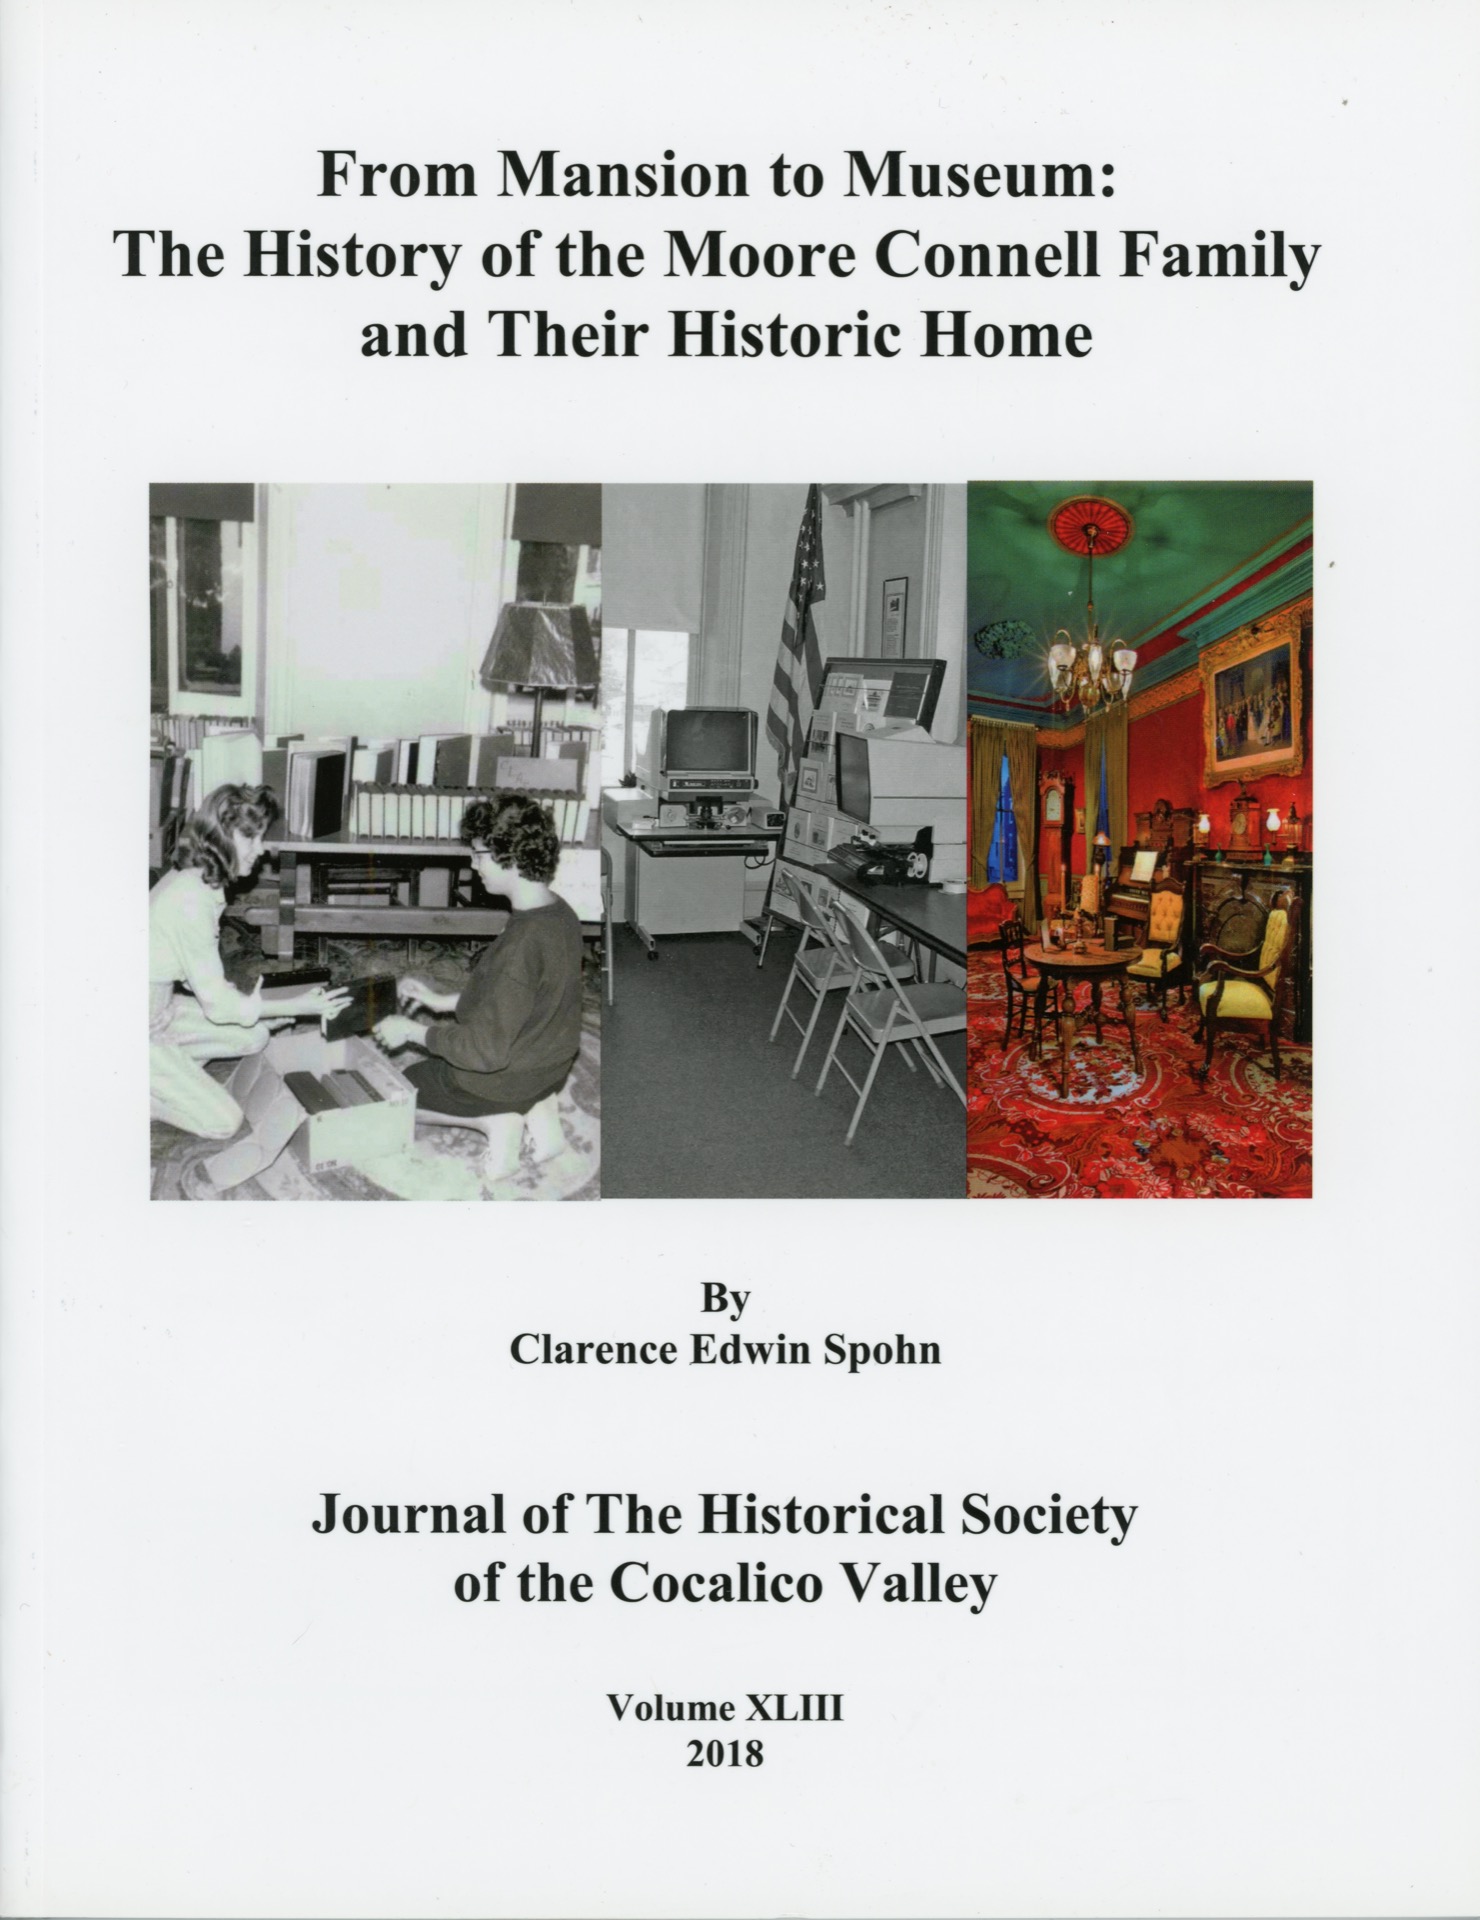 Vol. XLIII: “From Museum to Mansion: The History of the Moore Connell Family and Their Historic Home,” by Clarence E. Spohn.